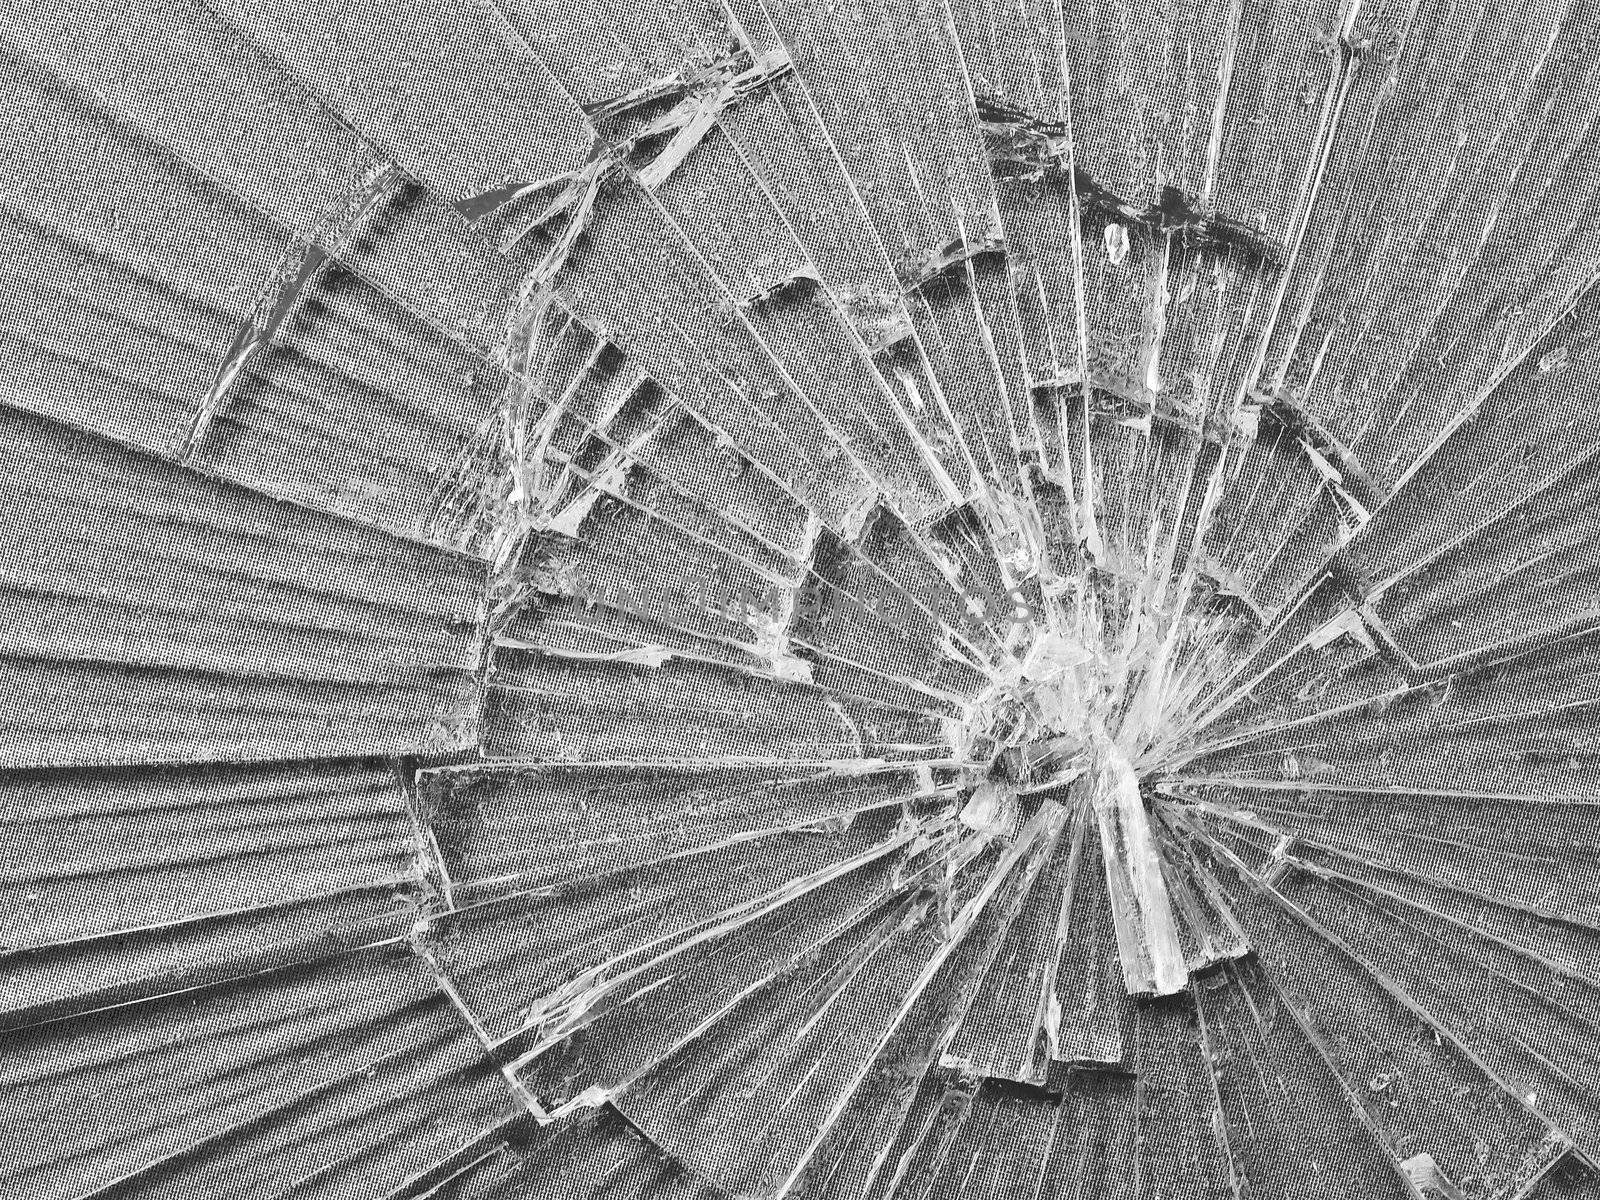 Cracked Glass Macro in Black and White